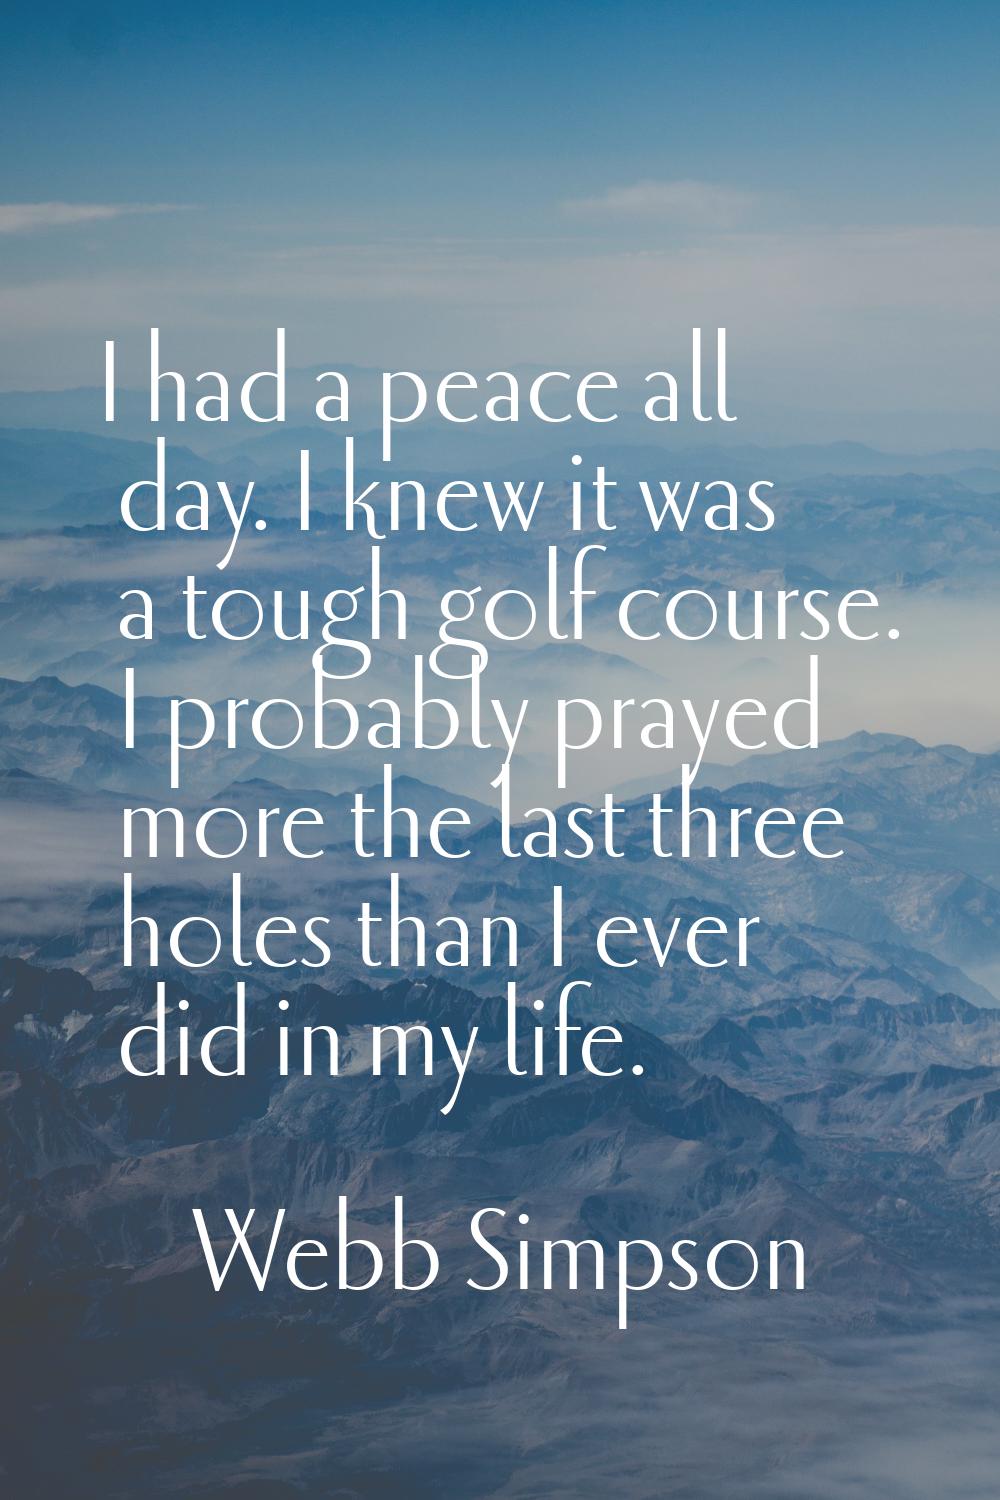 I had a peace all day. I knew it was a tough golf course. I probably prayed more the last three hol